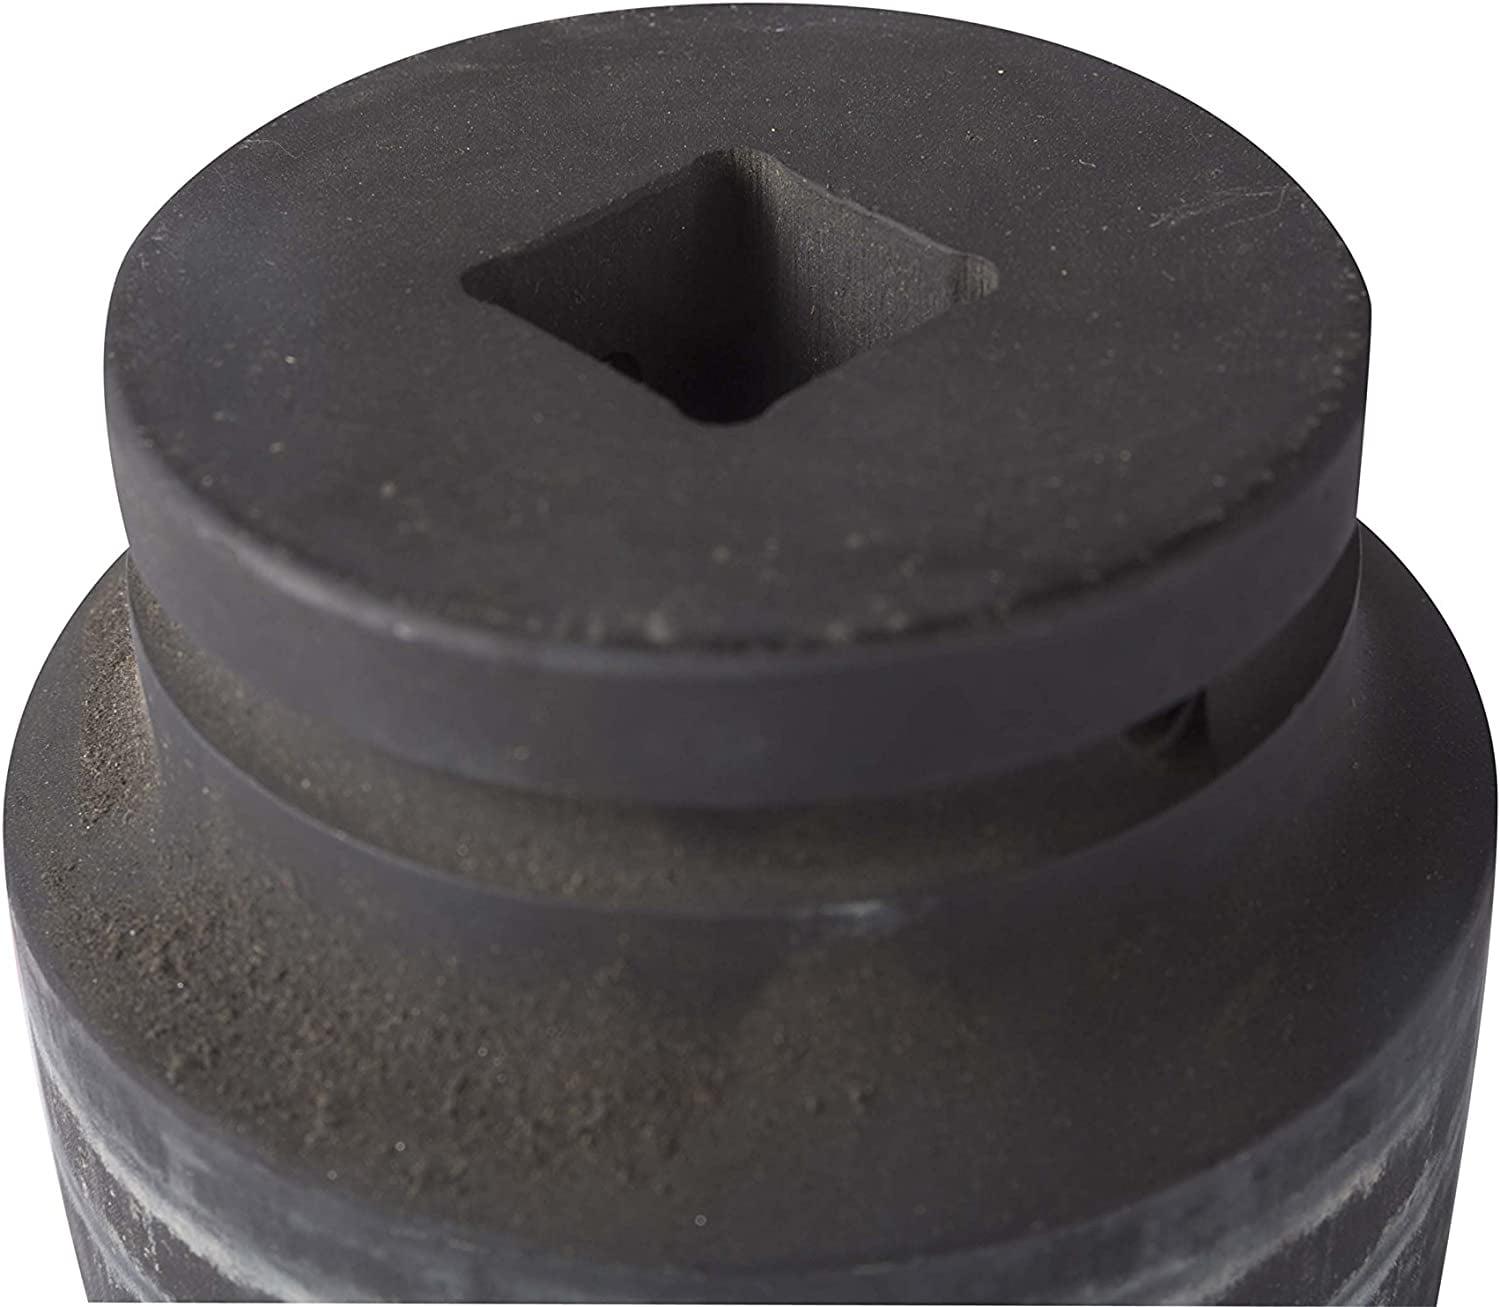 Sunex 248 1/2-Inch by 1-1/2-Inch Impact Socket Drive